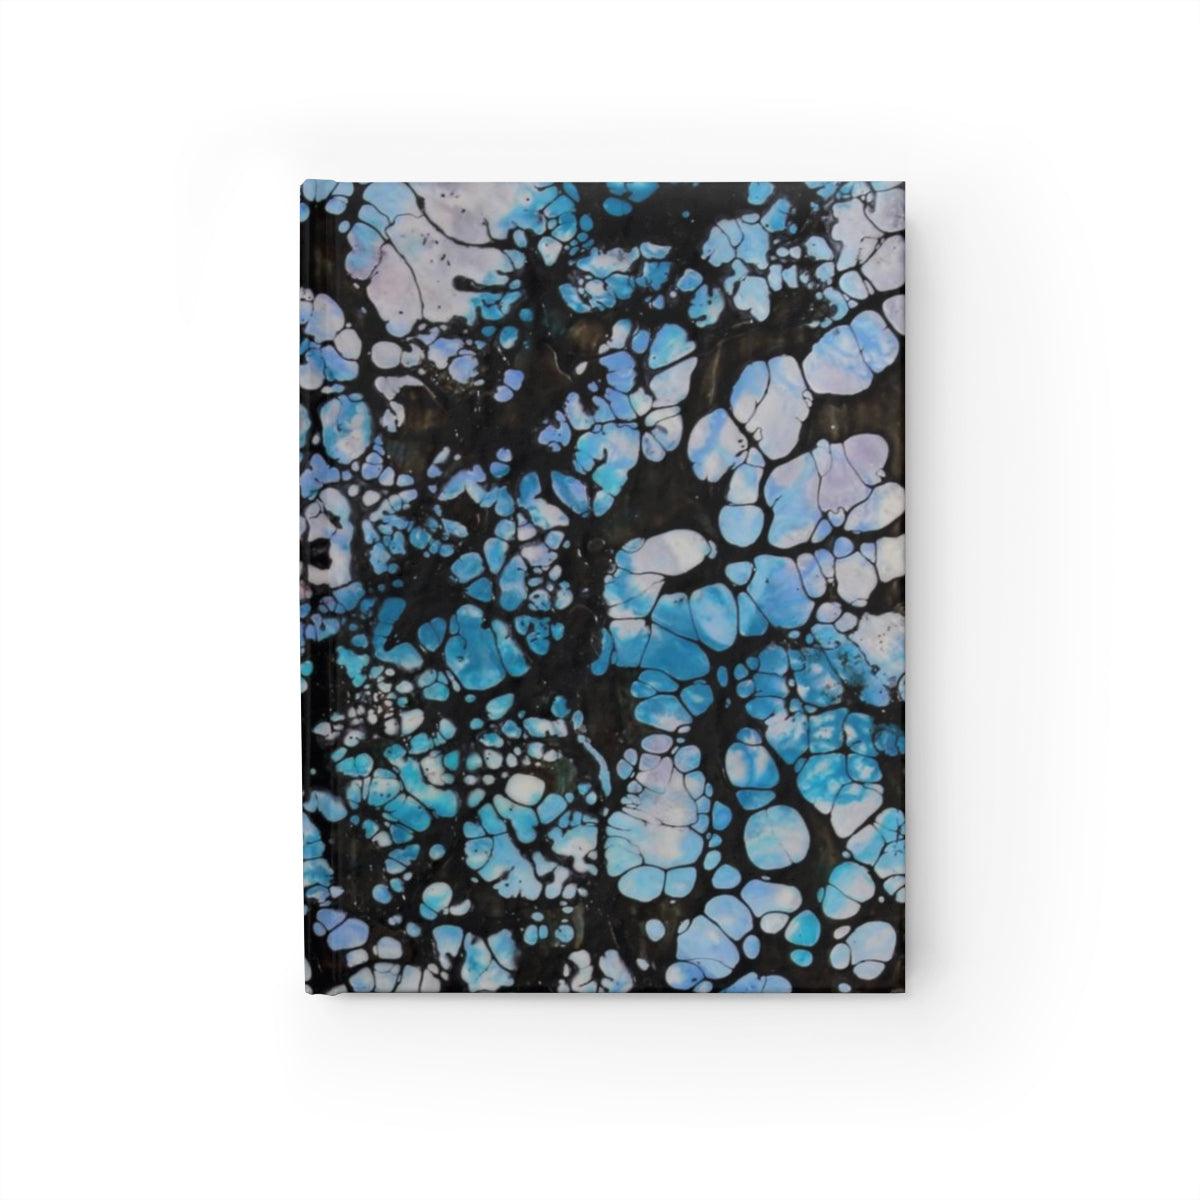 "Synapse" Journal - Ruled Line-Paper products - Mike Giannella - Encaustic Painting - Mixed Media Artist - Art Prints